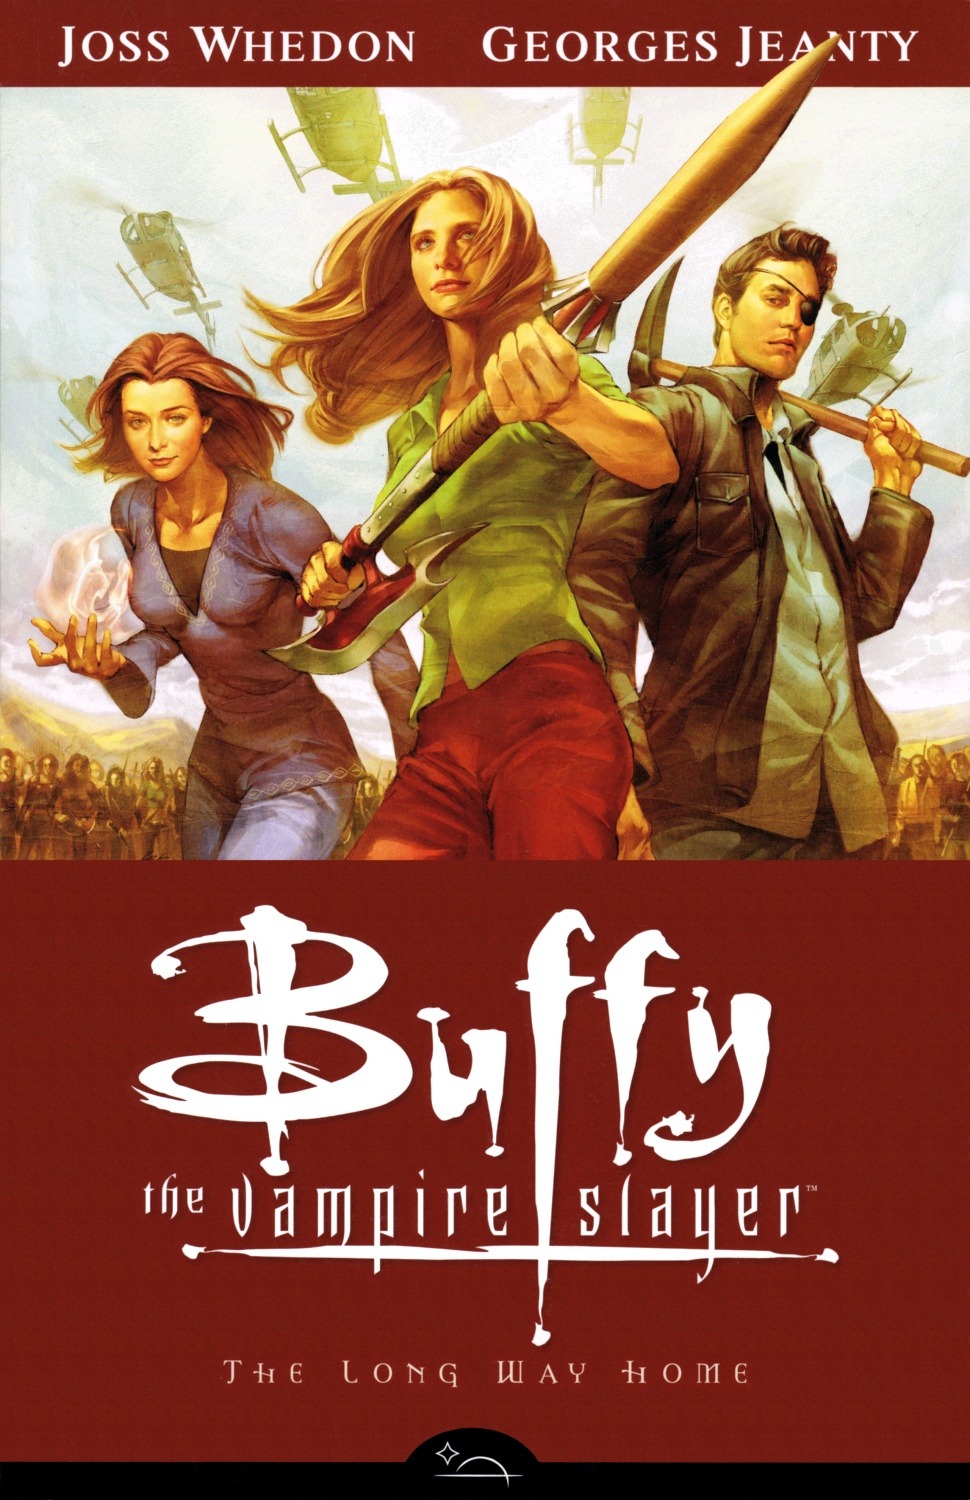 Started and finished #reading Buffy the Vampire Slayer: The Long Way Home, by Joss Whedon and Georges Jeanty. The first of the Season 8 continuation comics, picking up the story from where the TV show left off.
Fun, though not a patch on the TV show....